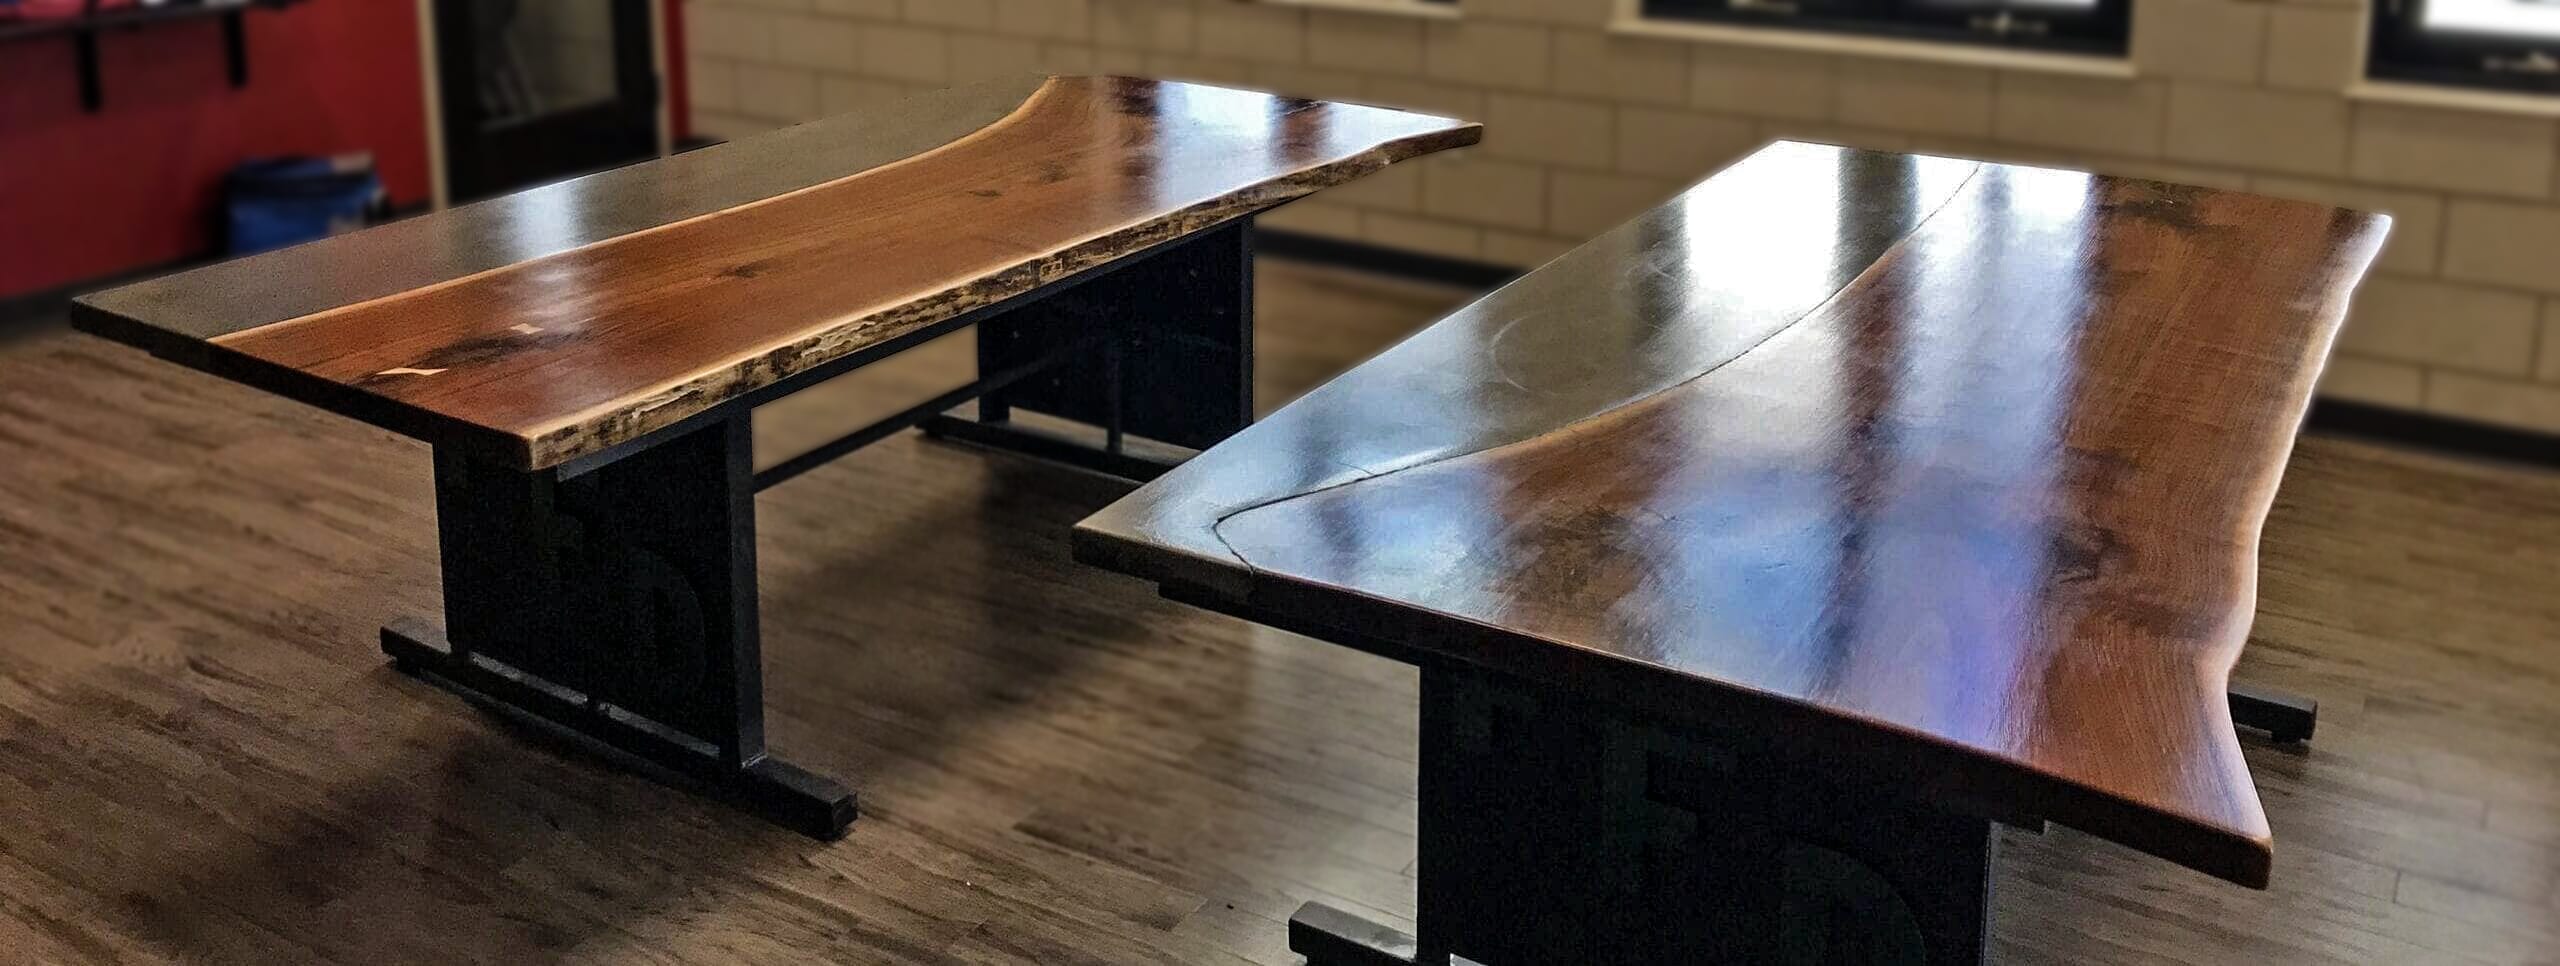 Dye Stained Concrete and Wood Tables